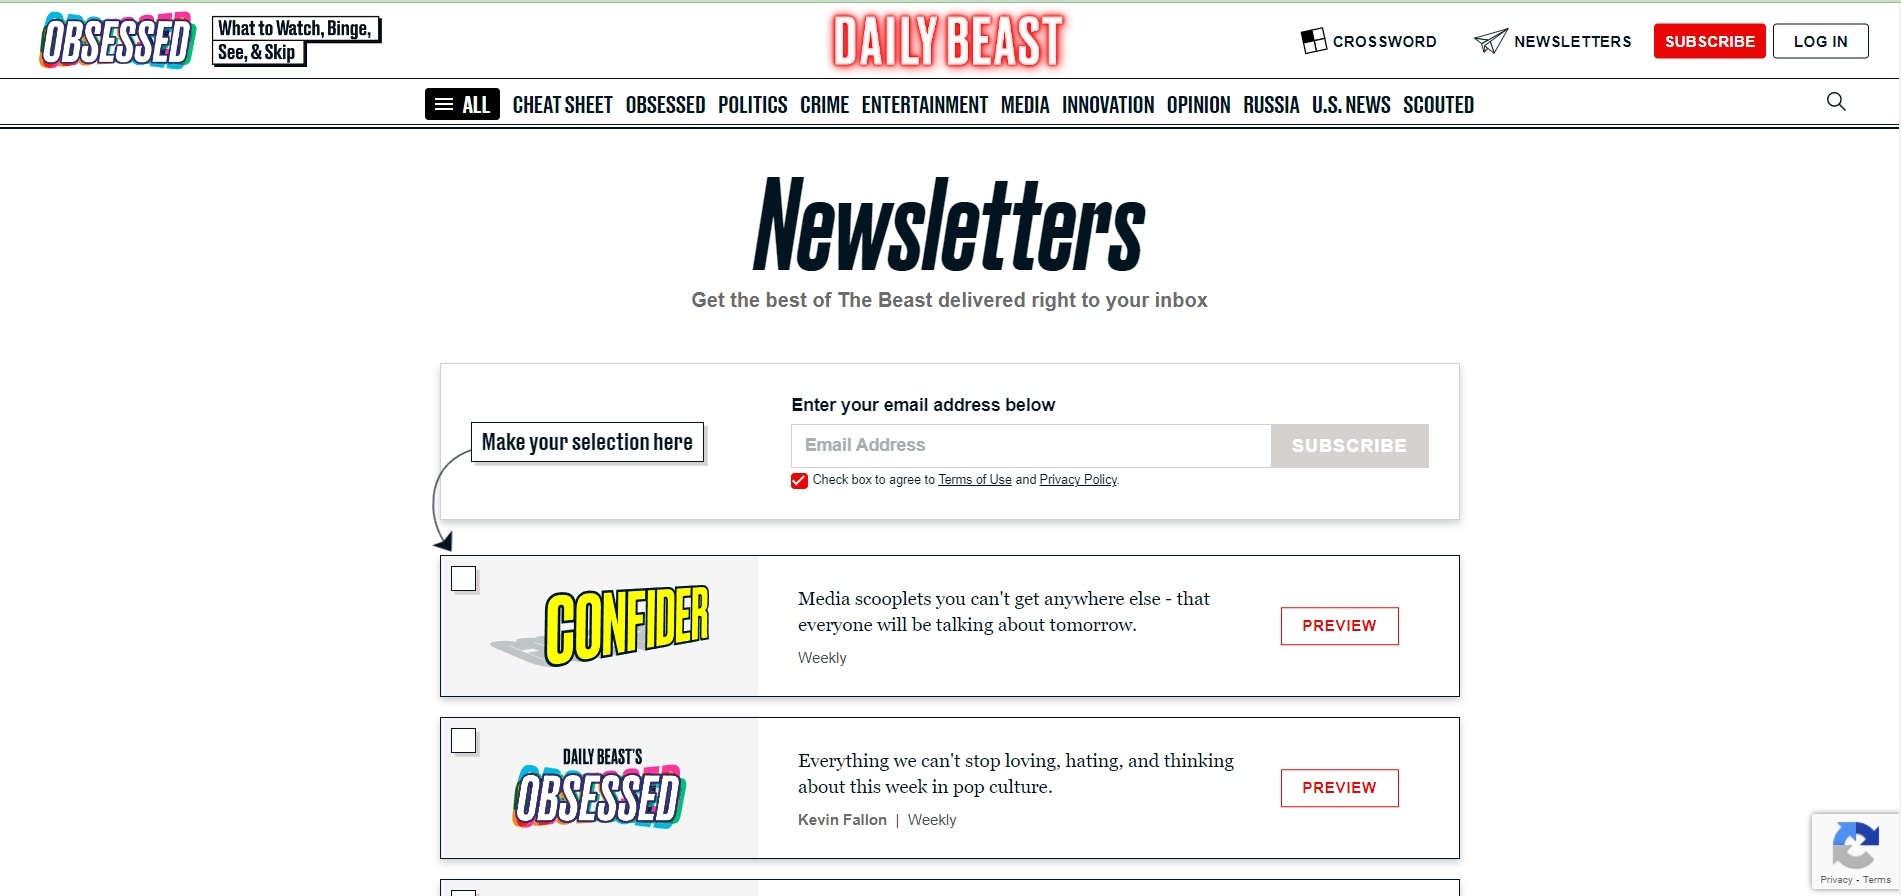 The Daily Beast email sign up offer for their newsletter options